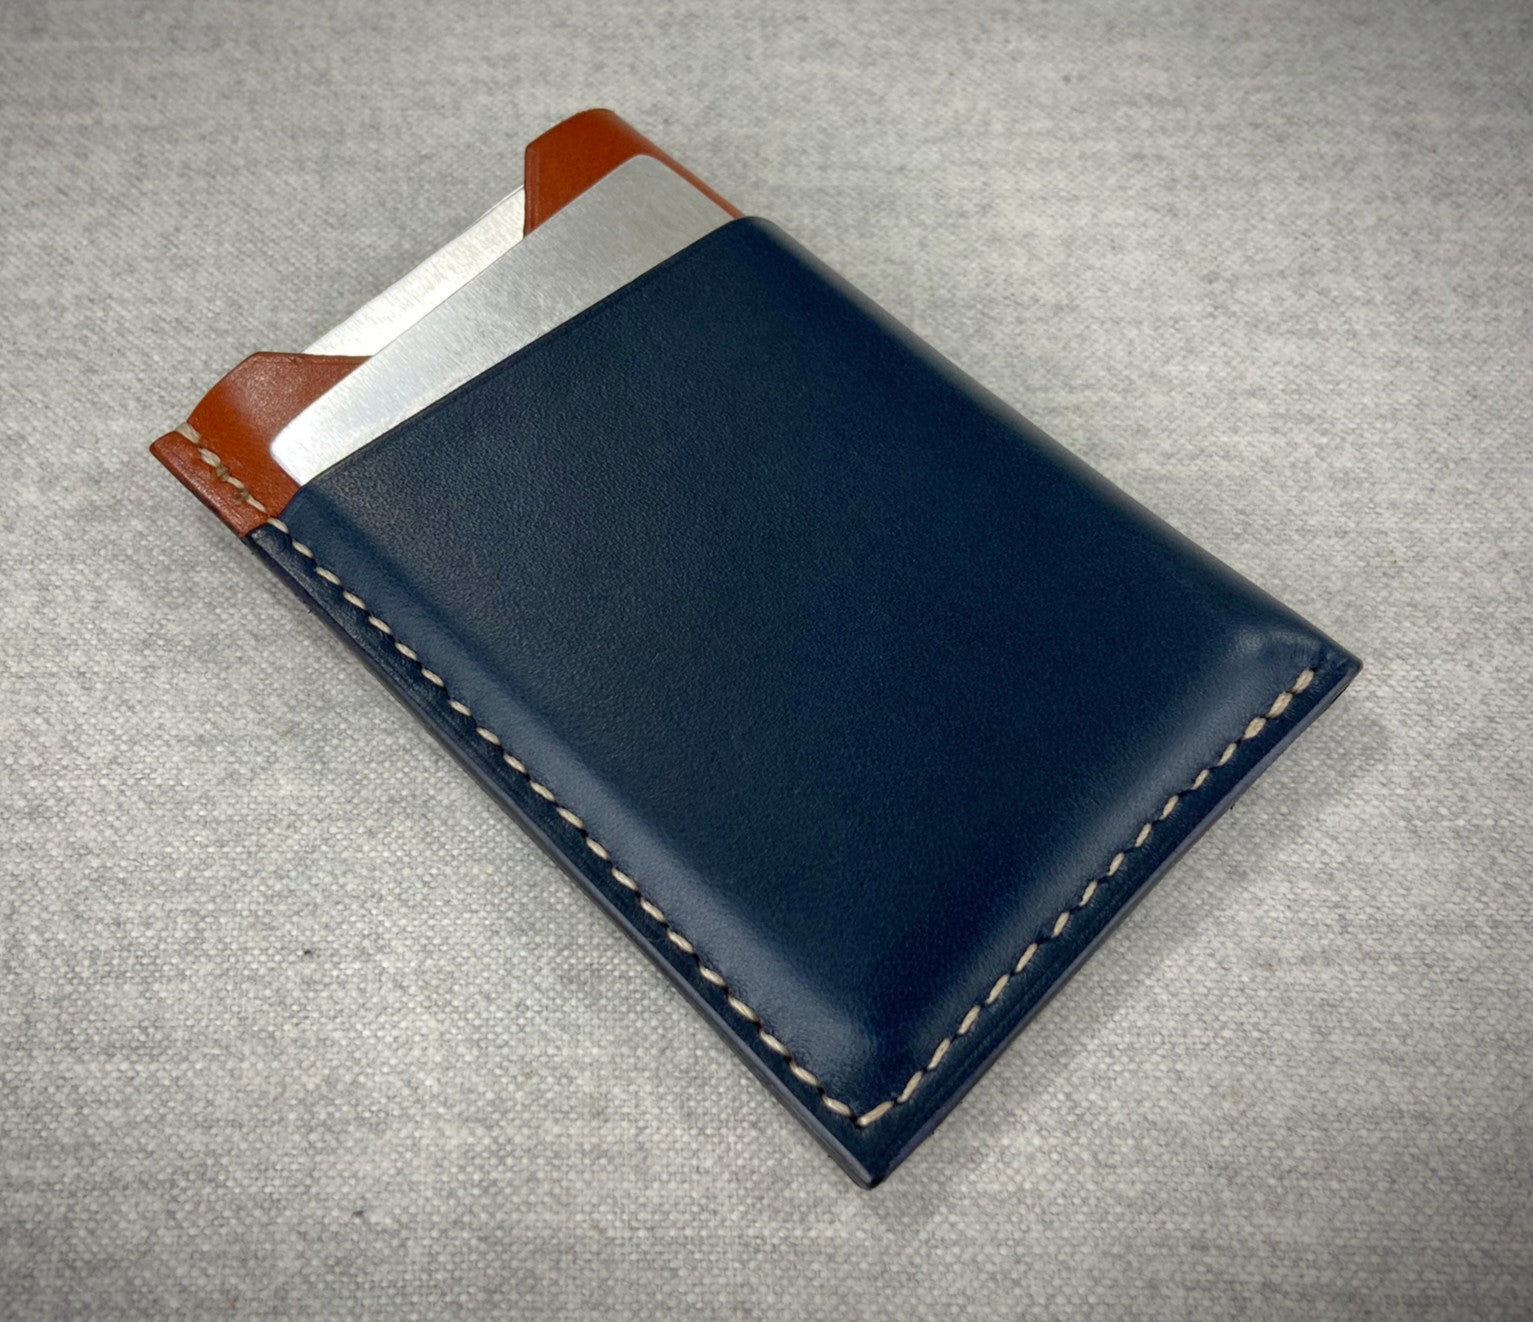 Wrap Wallet - The best wallet in the world, made in the USA